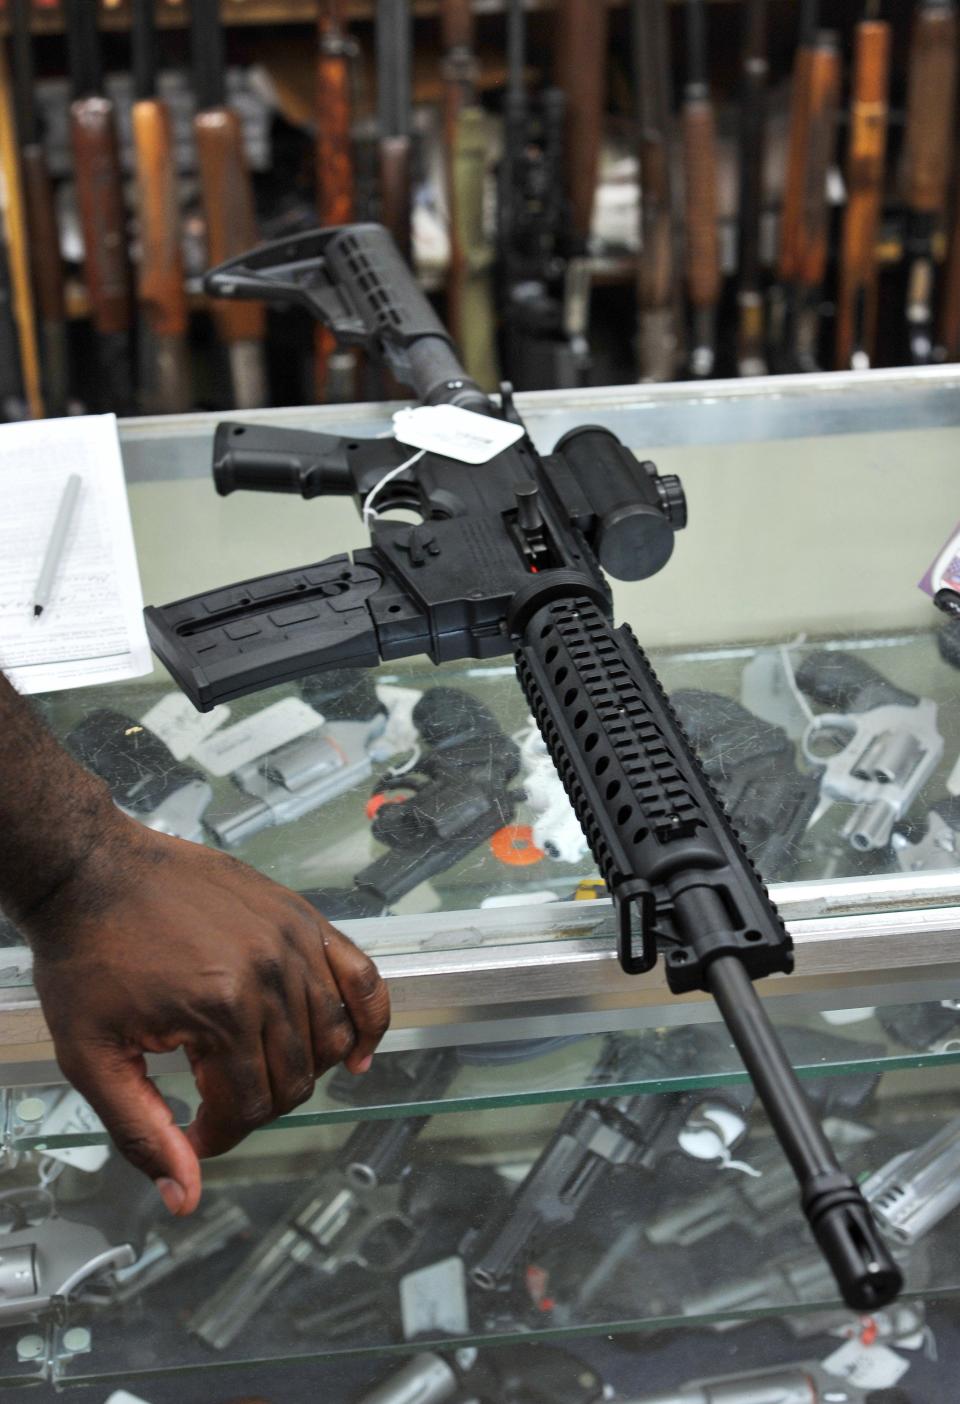 AR-15 style rifles like this one in a 2016 photo from a Jacksonville gun shop could be converted into fully automatic machine guns using the AutoKeyCard device that Orange Park resident Kristopher "Justin" Ervin was sentenced to 68 months in prison for manufacturing.